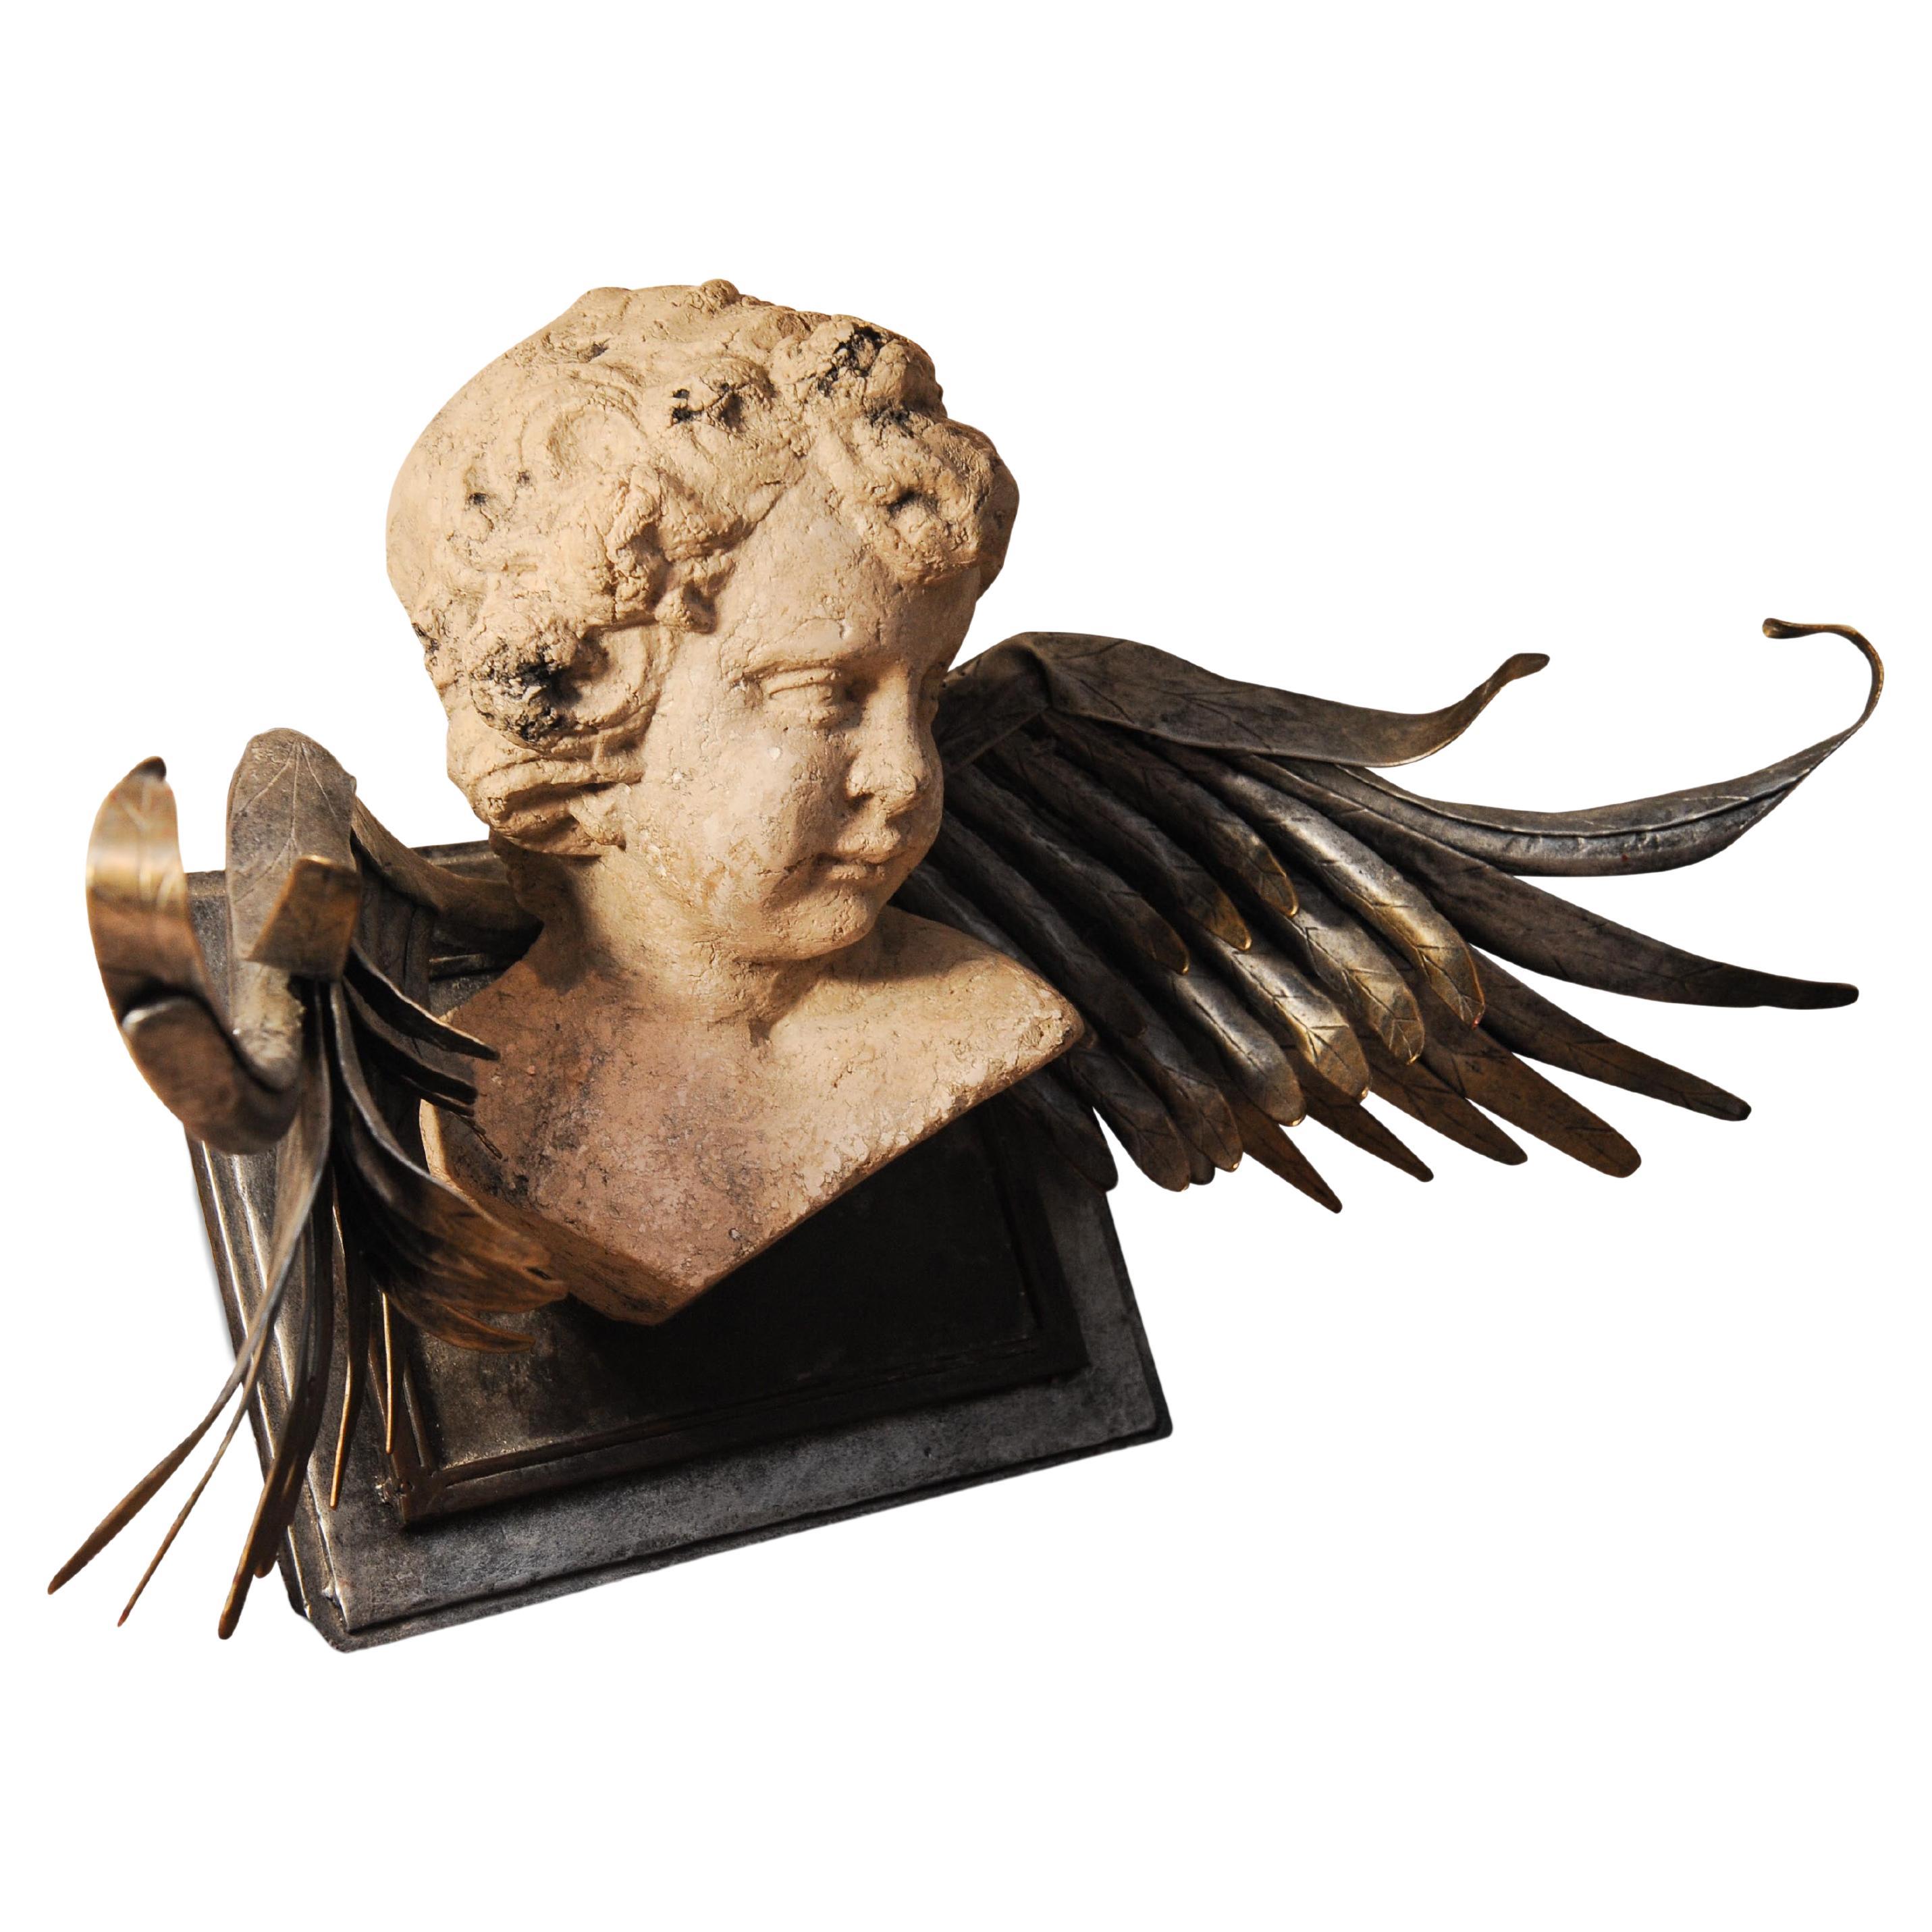 Unusual Decorative neoclassic Revival Putti/Cherub Stone Cast Sculpture With Metallic Wings, Wall Mountable.

Classicism is a specific genre of philosophy, expressing itself in literature, architecture, art, and music, which has Ancient Greek and